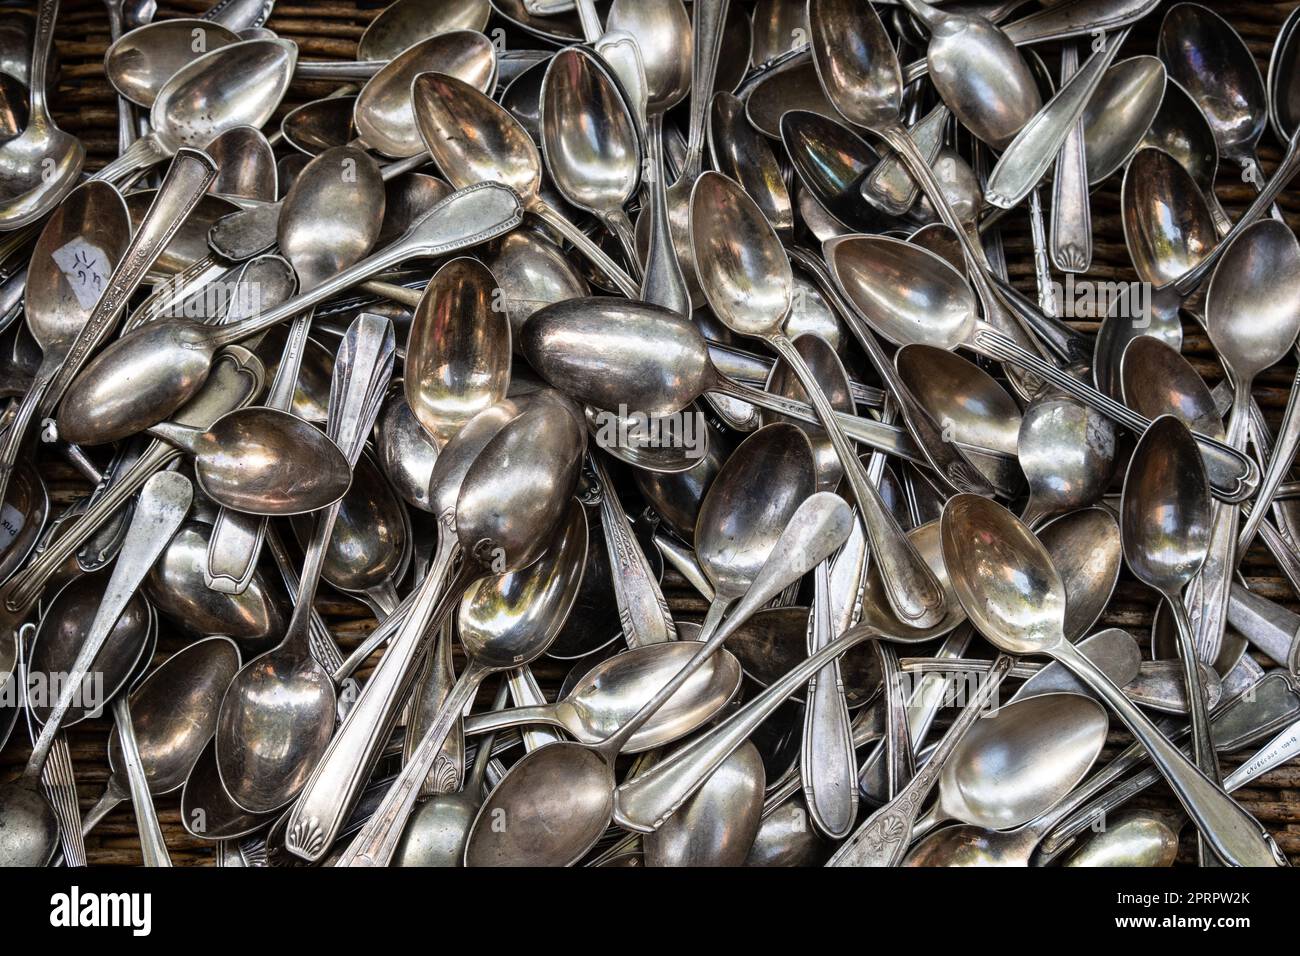 Heap of aged silver spoons Stock Photo